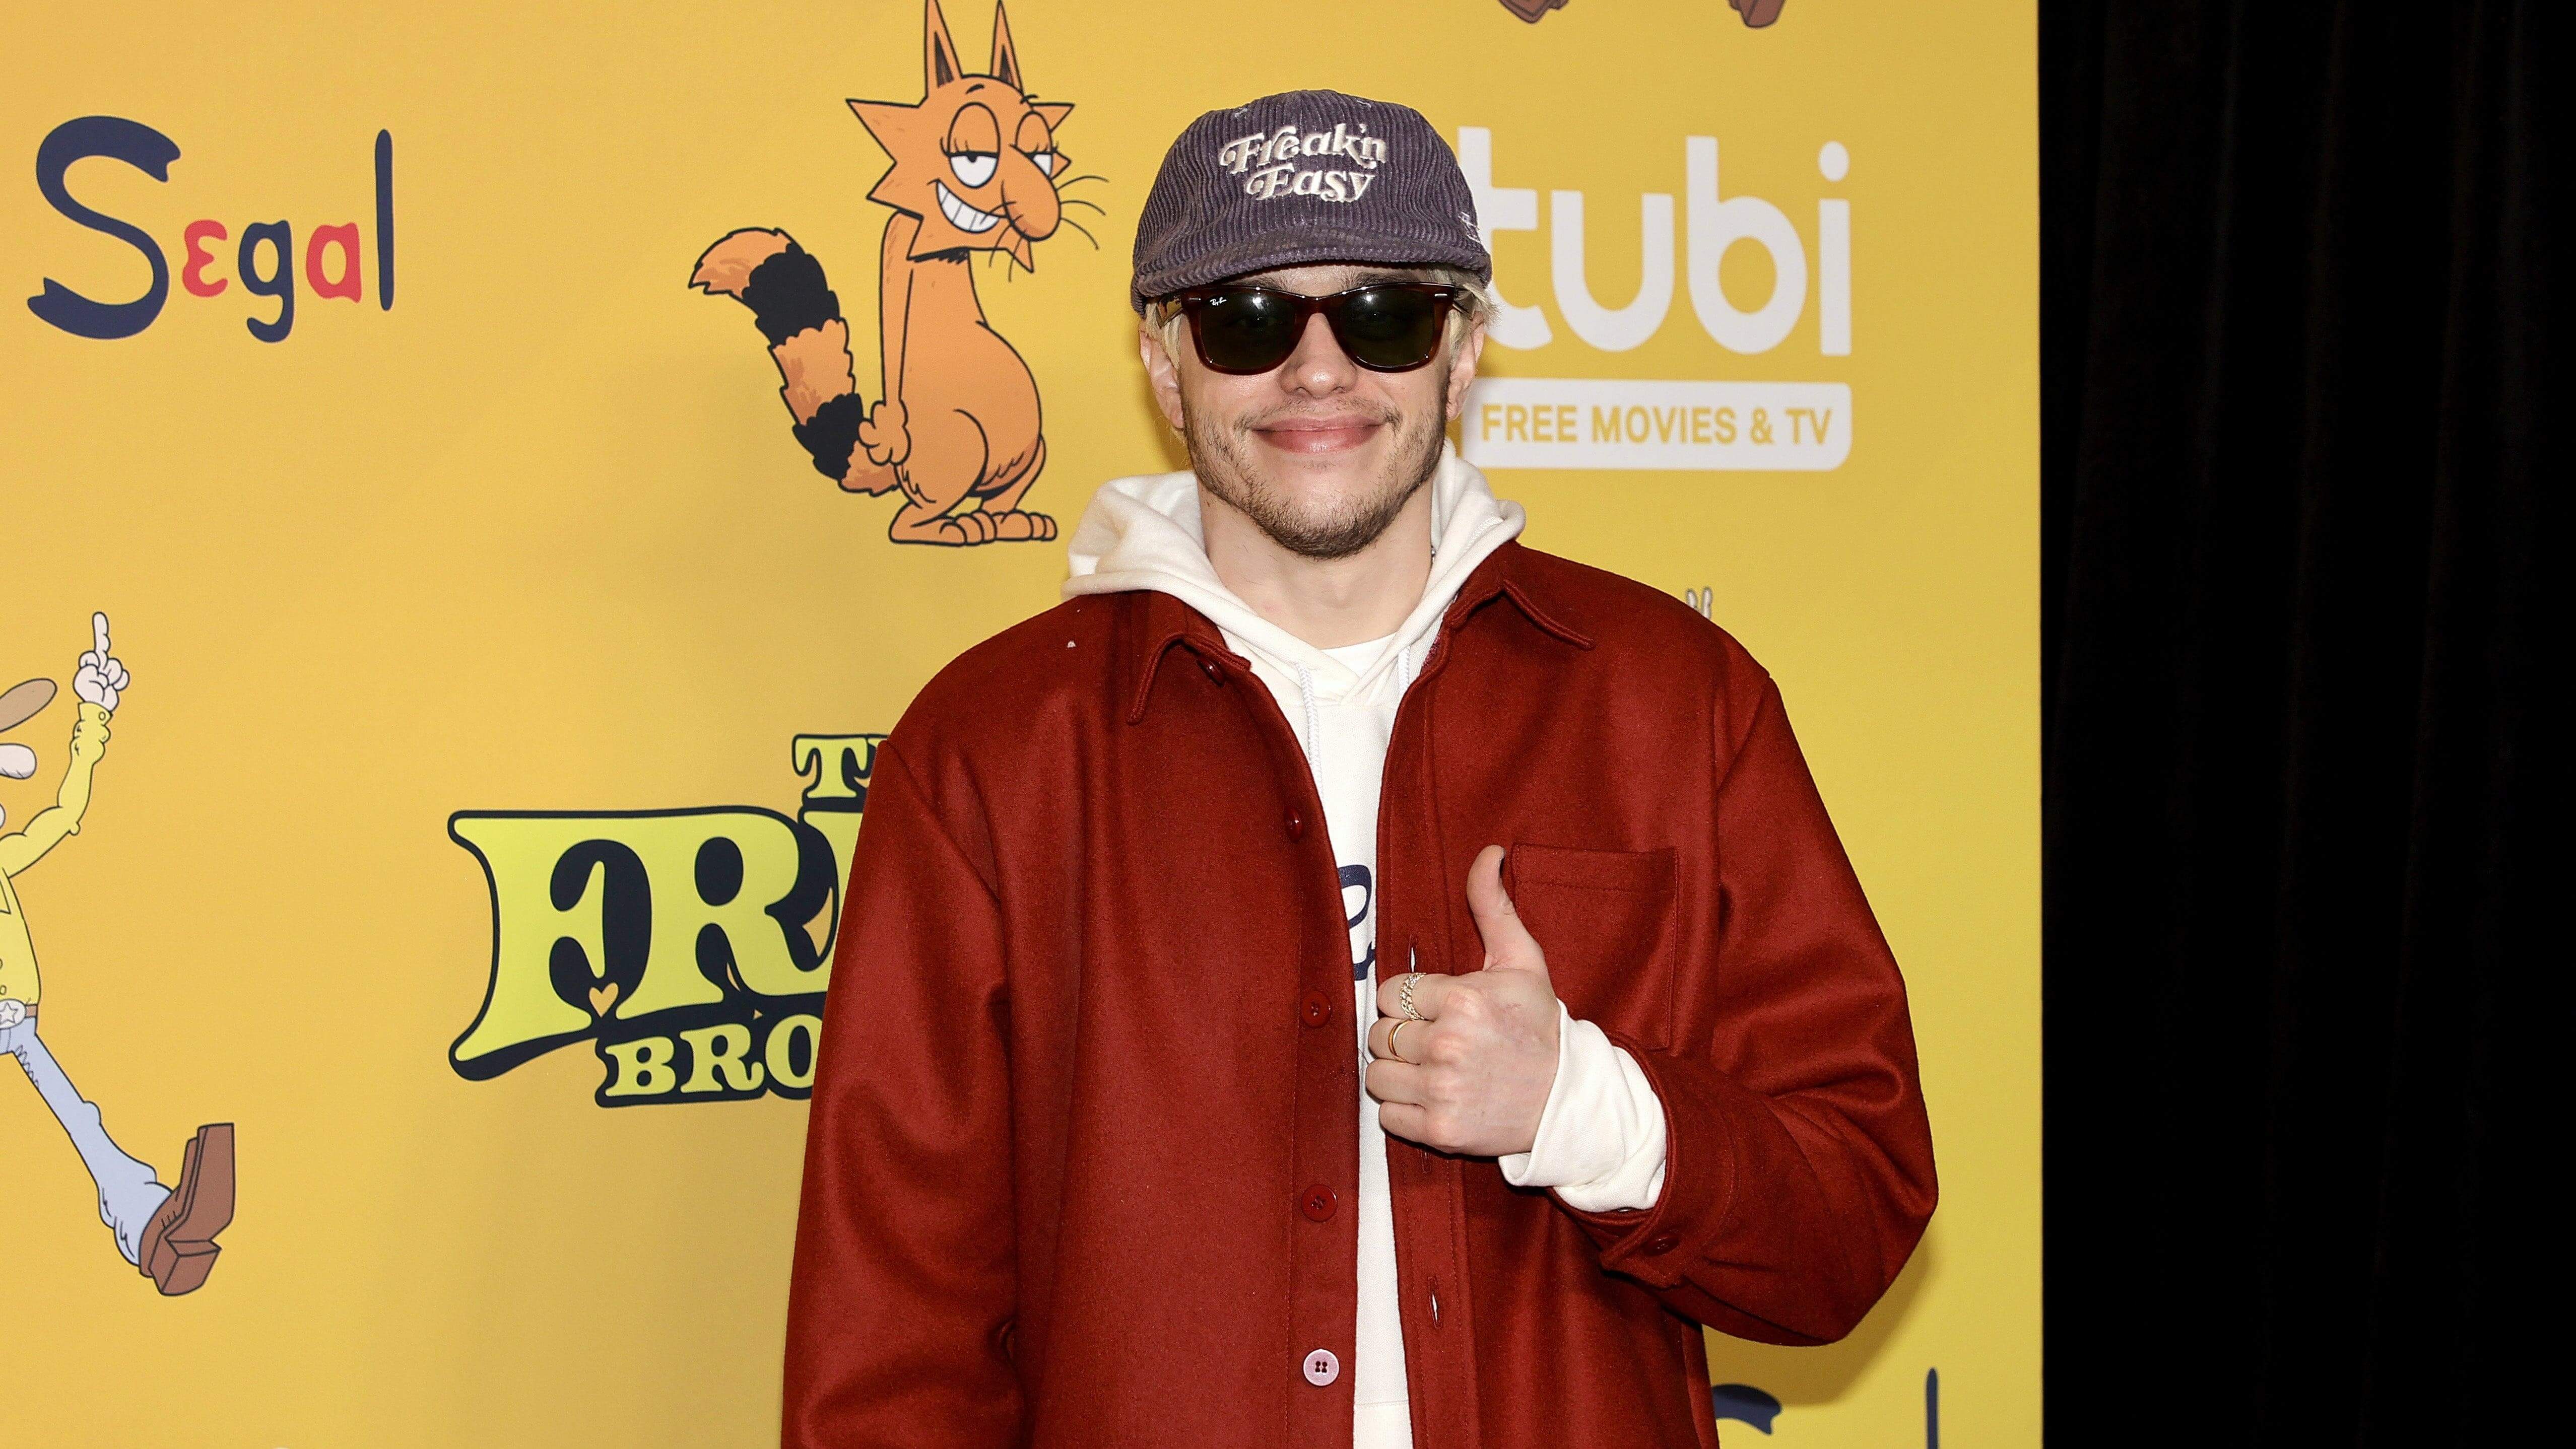 Treating Pete Davidson’s comedy as confession isn’t necessary